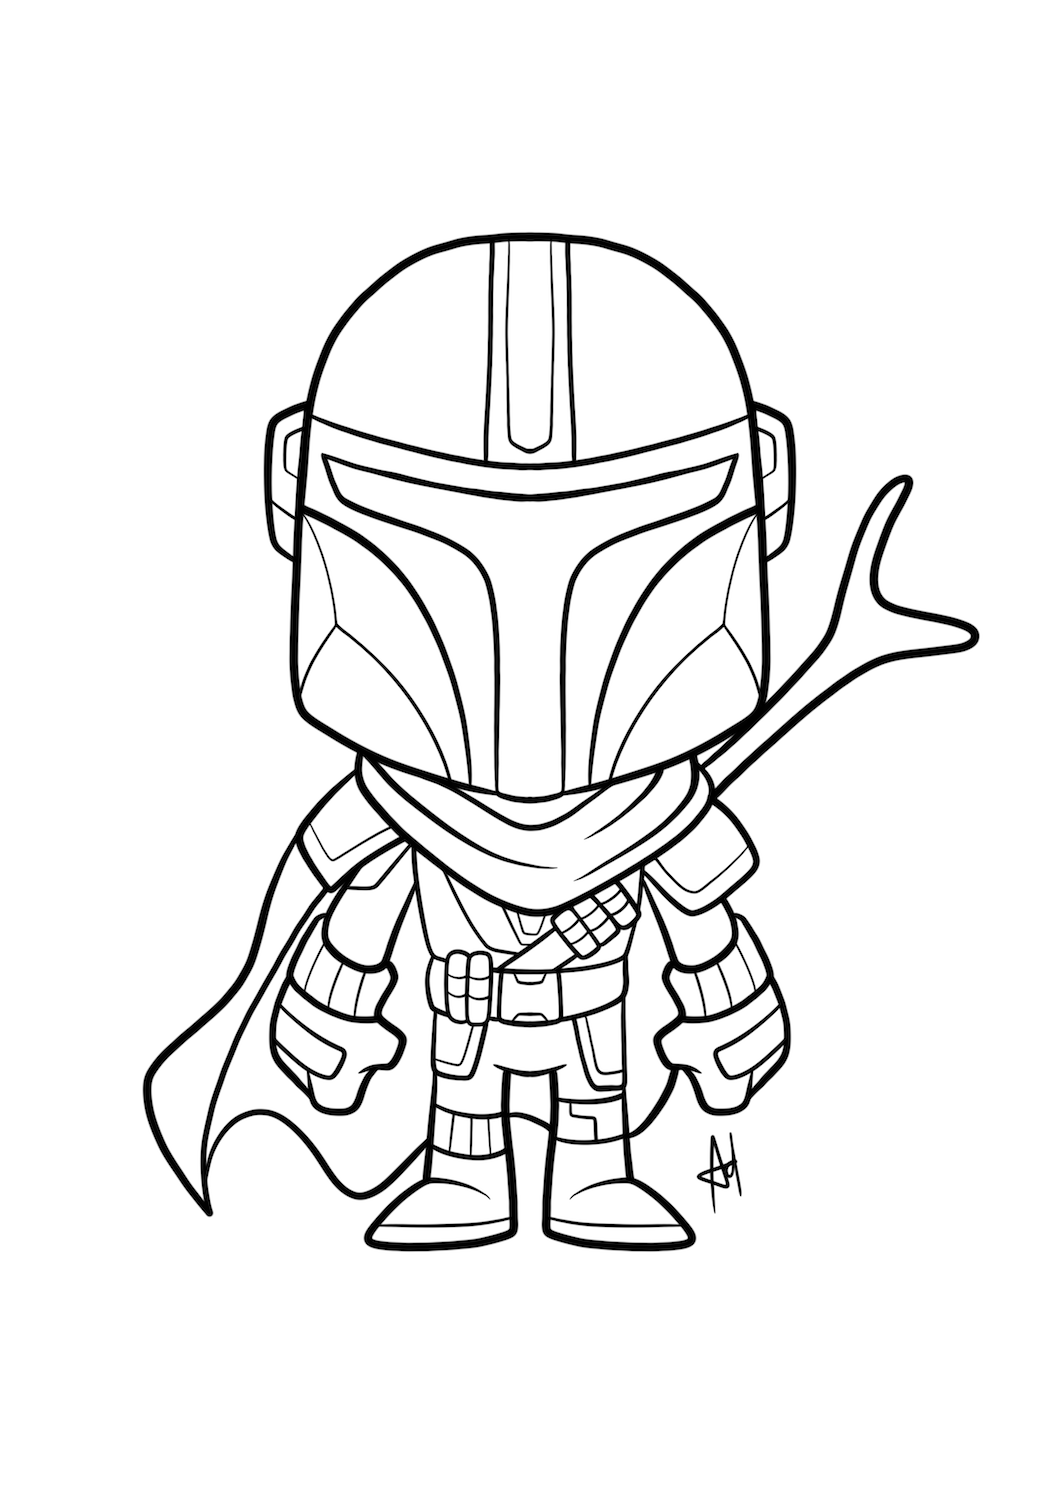 Download The Mandalorian on Behance Free coloring page with logo of panathi...